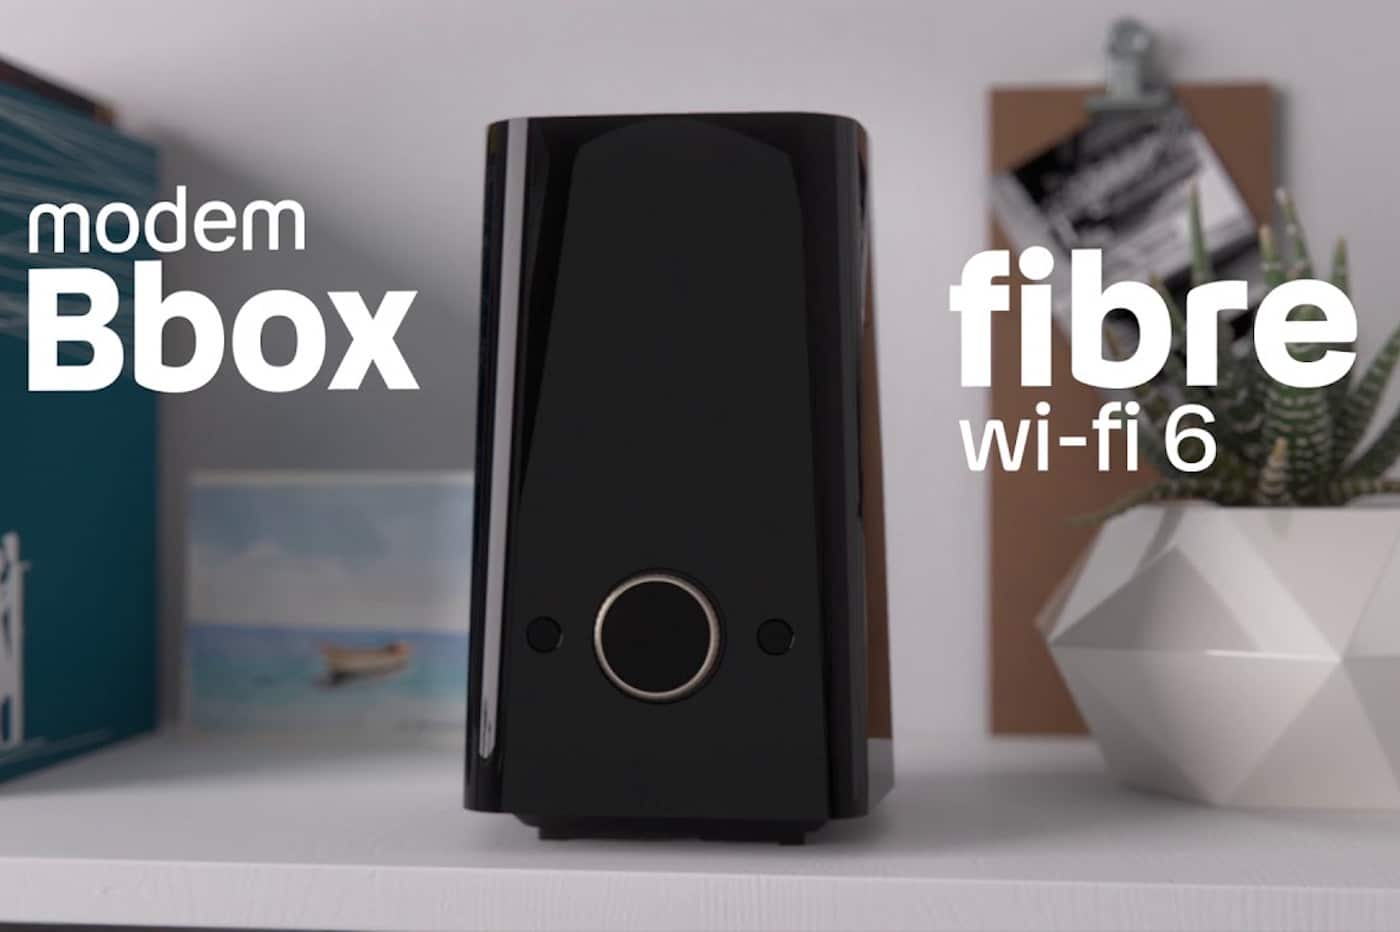 https://www.cablereview.fr/wp-content/uploads/2020/06/bbox-wifi-6-1.jpg